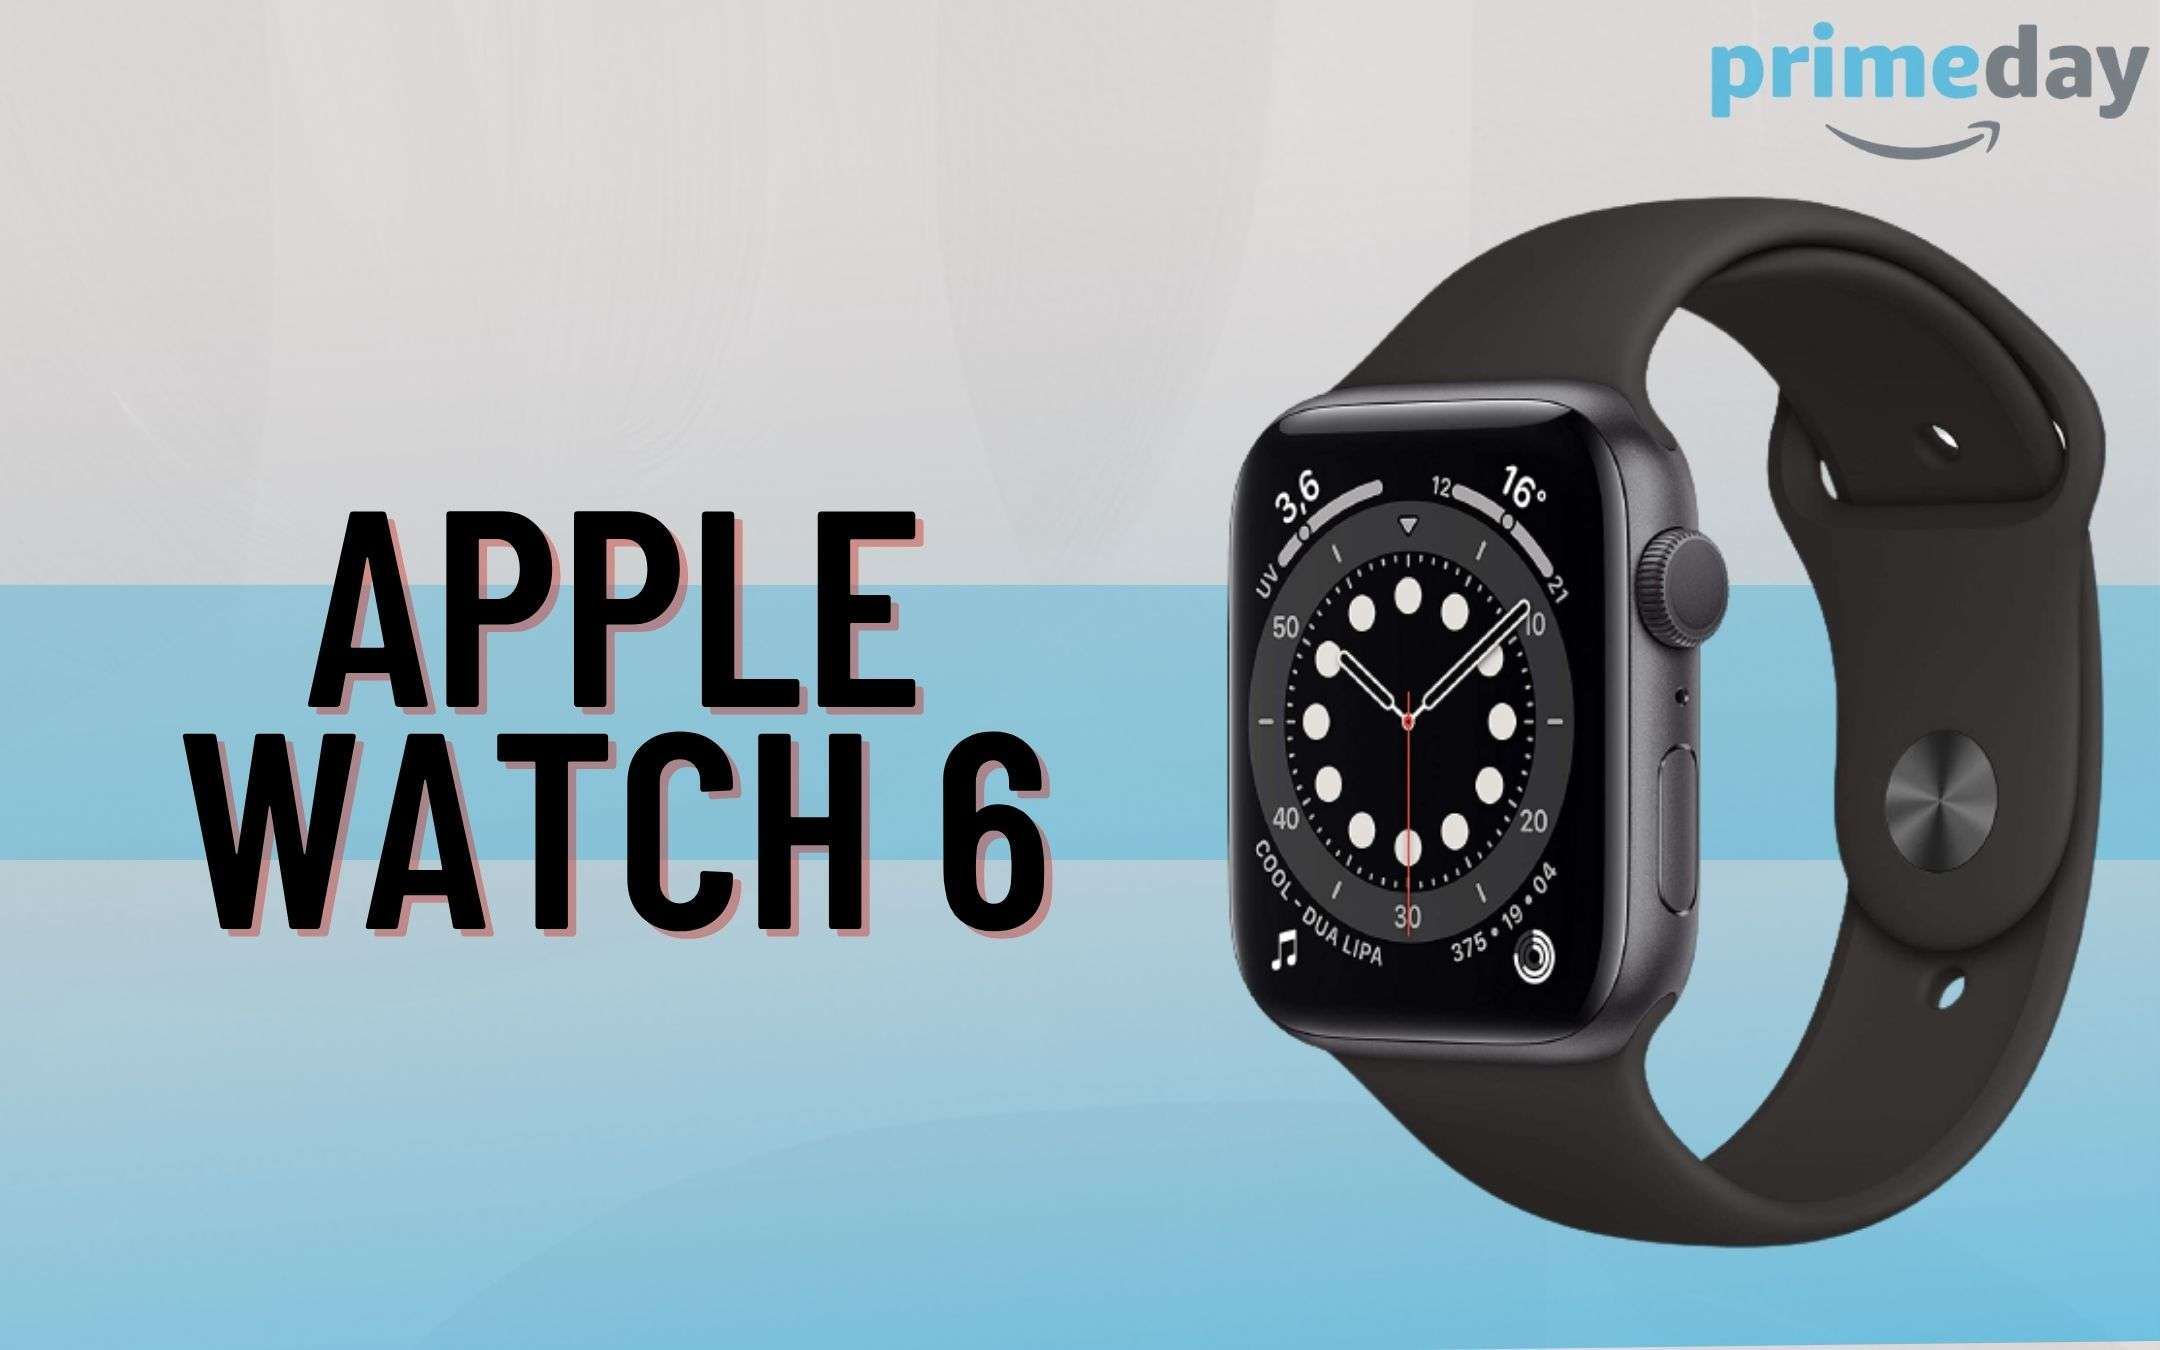 Prime Day: anche Apple Watch Series 6 è in offerta WOW